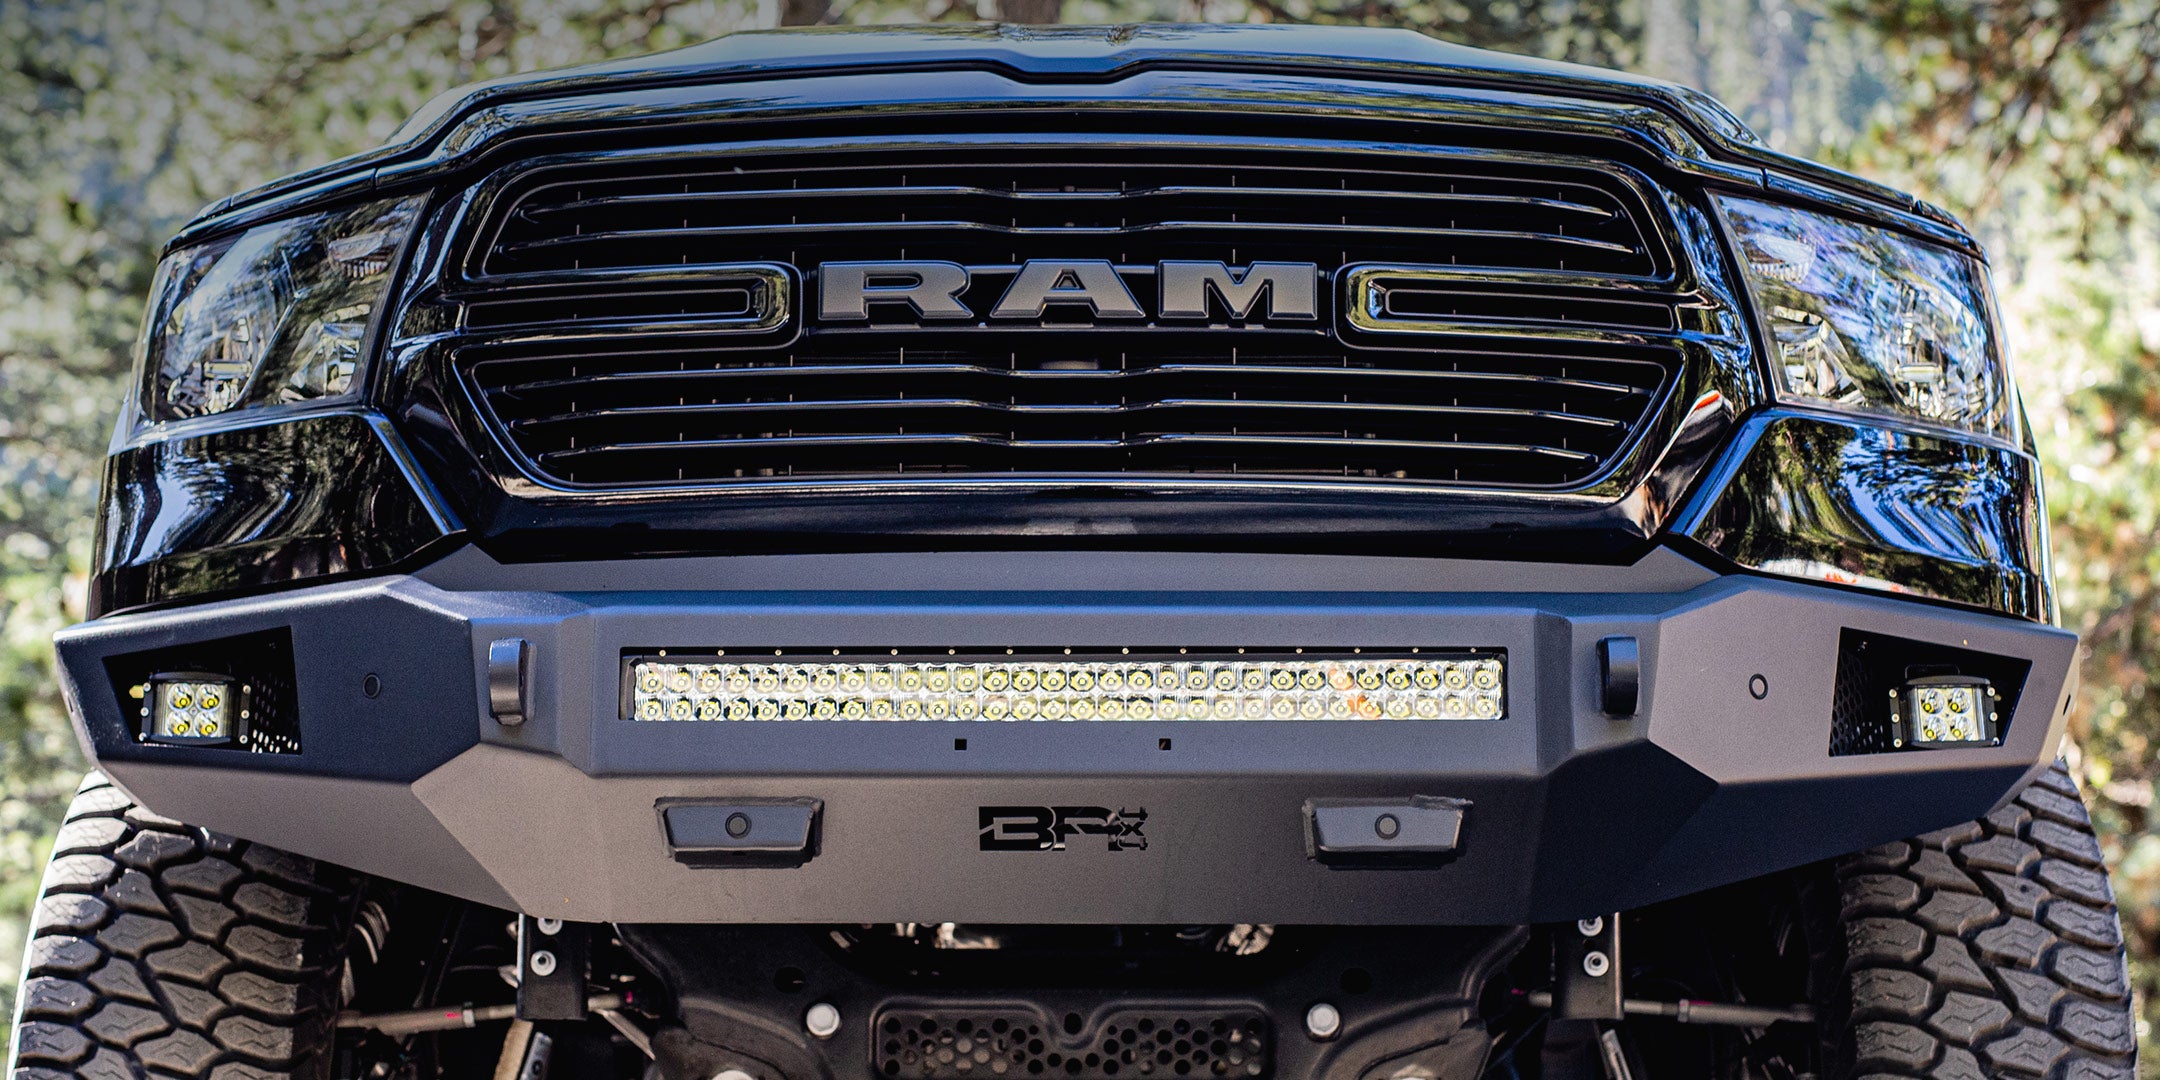 Body Armor 4x4 offers some of the best quality and best looking after market Dodge Ram bumpers on the market.